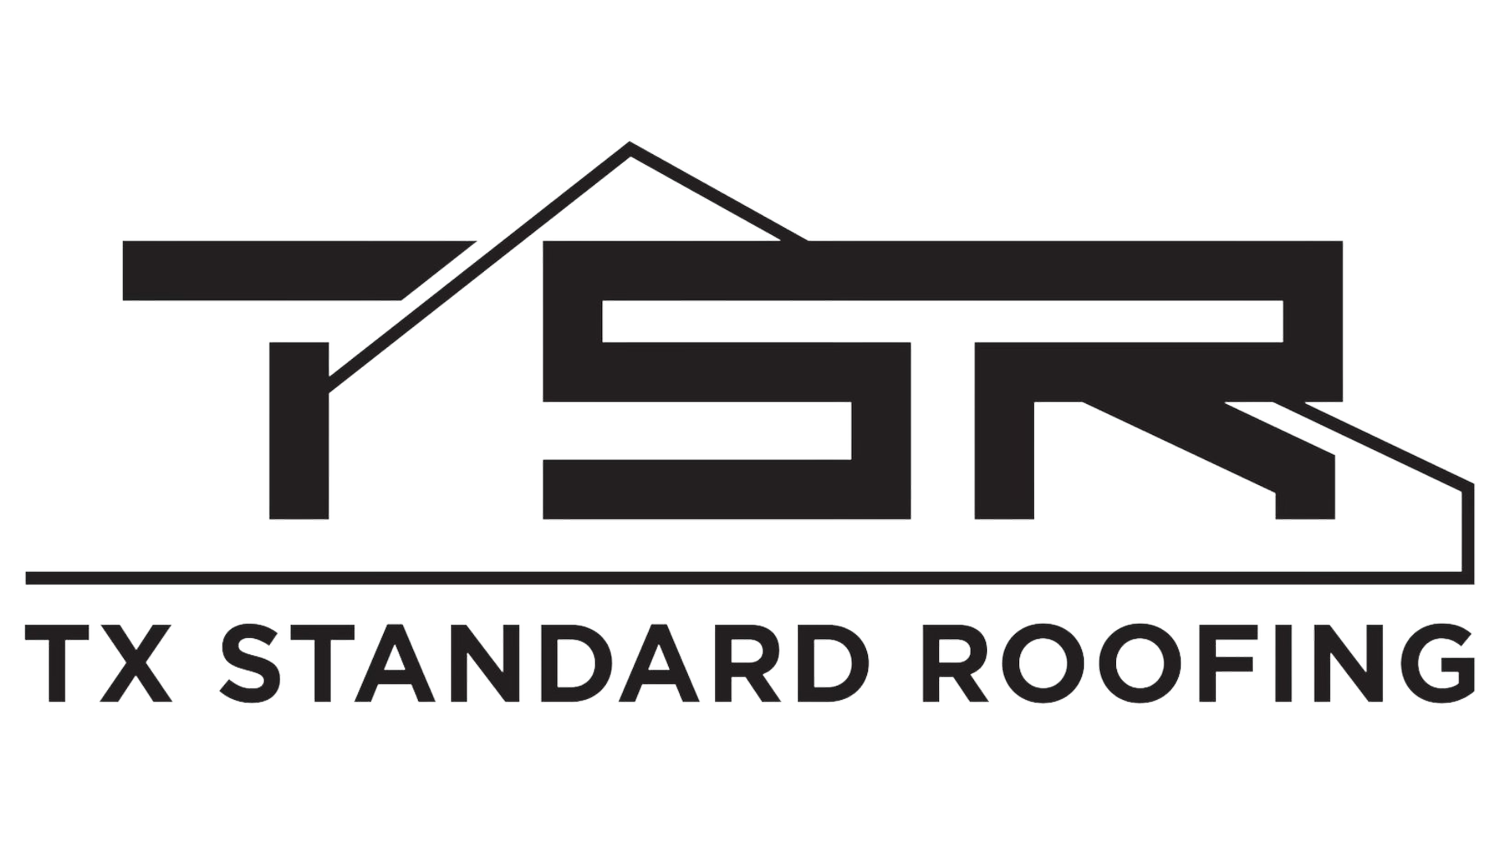 TX STANDARD ROOFING | Fort Worth Texas | Tarrant County Roofing Services